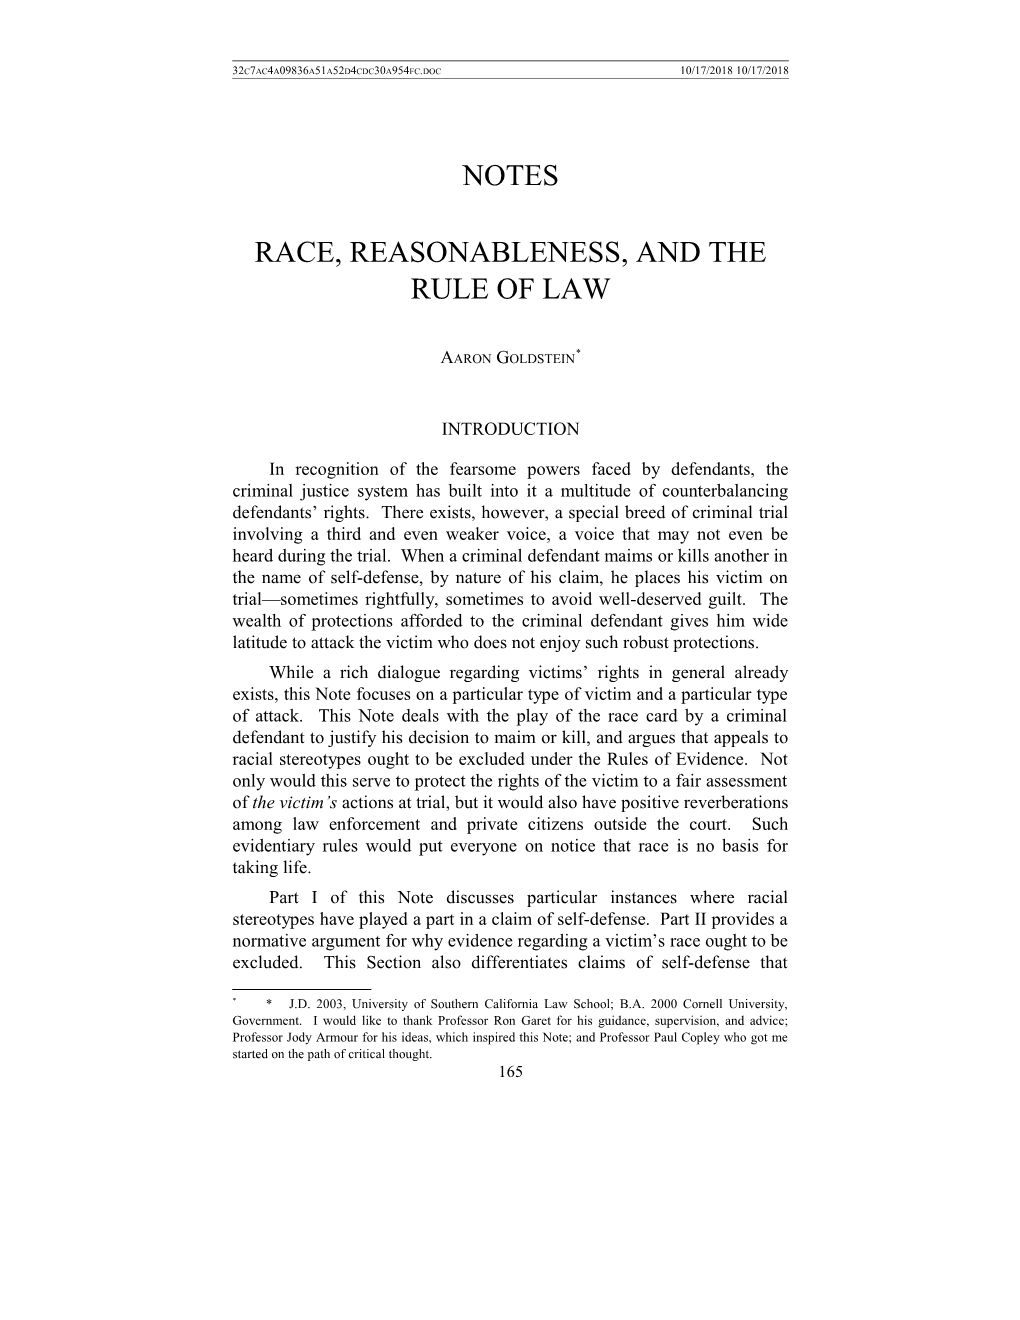 Race, Reasonableness, and the Rule of Law